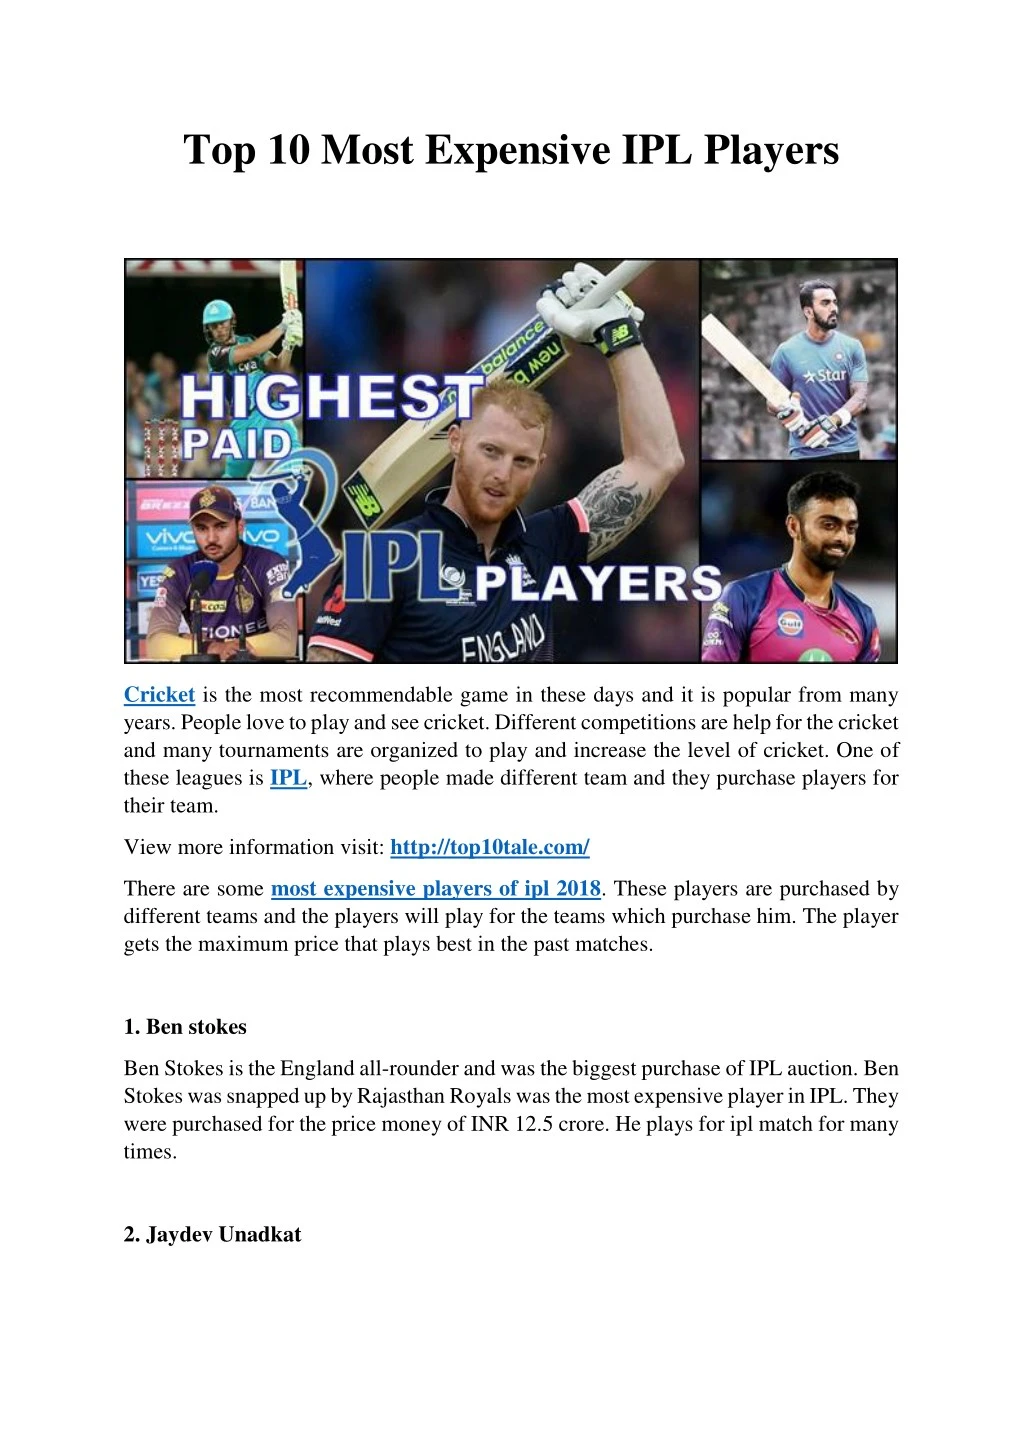 PPT Top 10 Most Expensive IPL Players PowerPoint Presentation, free